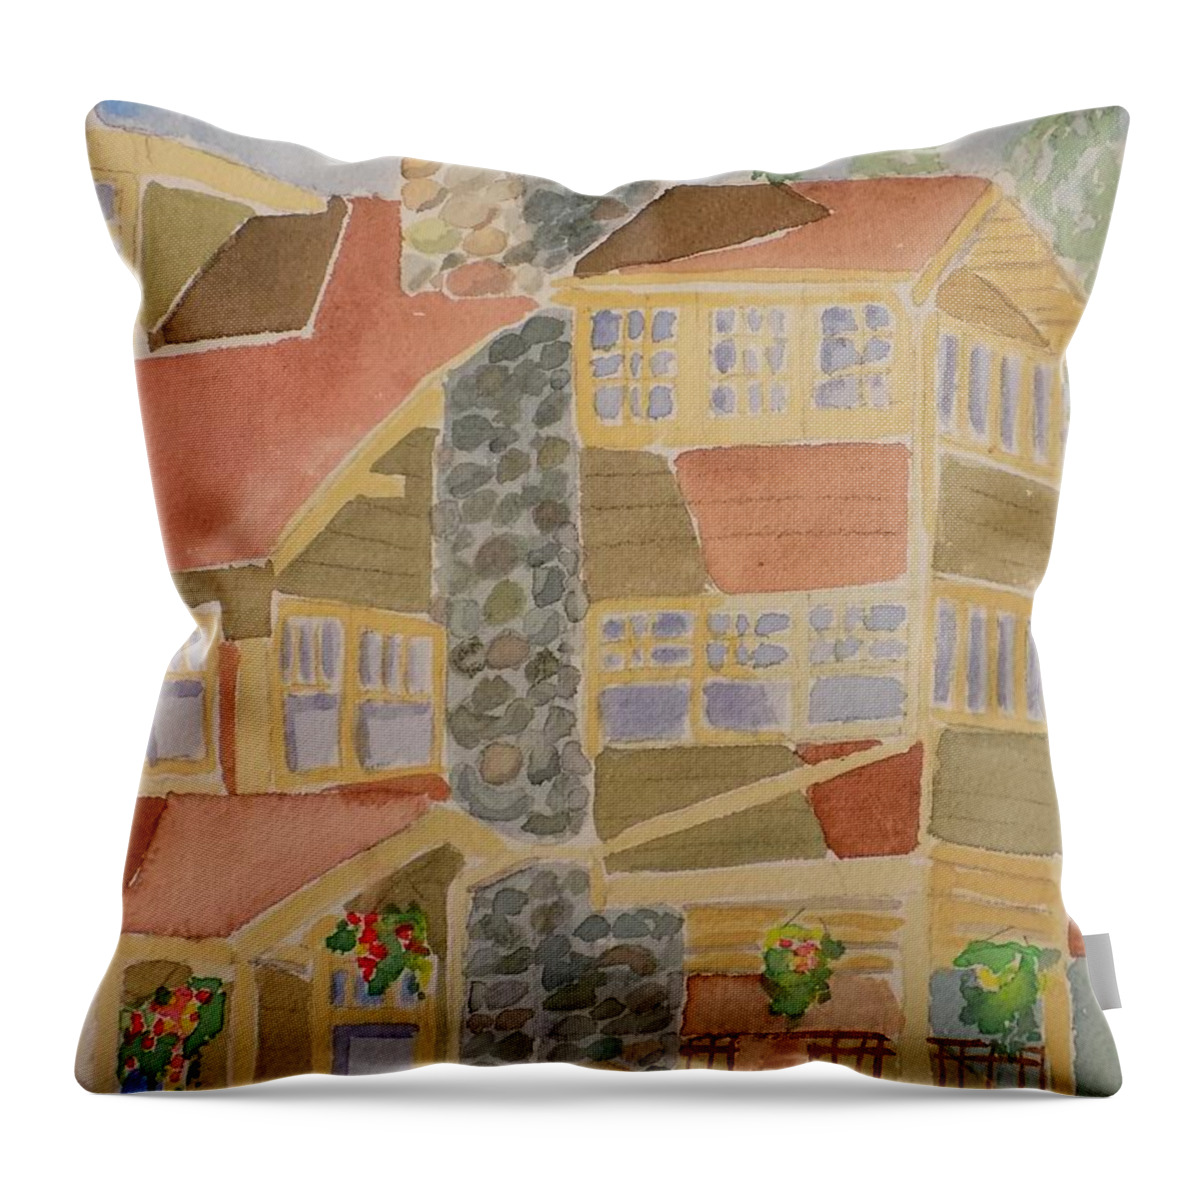 State Game Lodge Throw Pillow featuring the painting Game Lodge by Rodger Ellingson